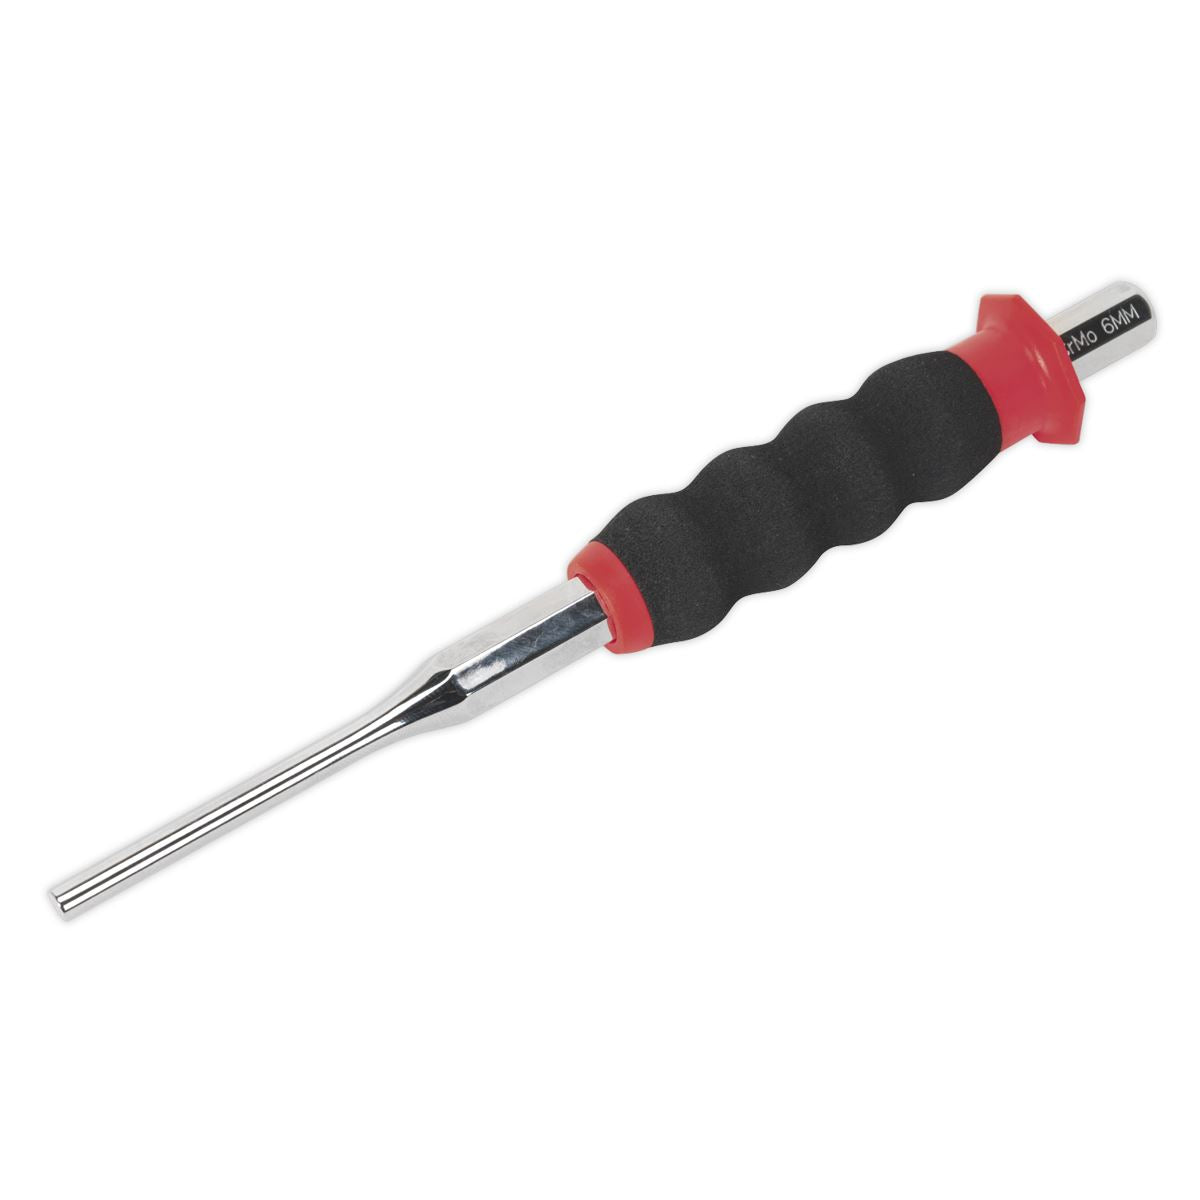 Sealey Premier Sheathed Parallel Pin Punch Ø6mm